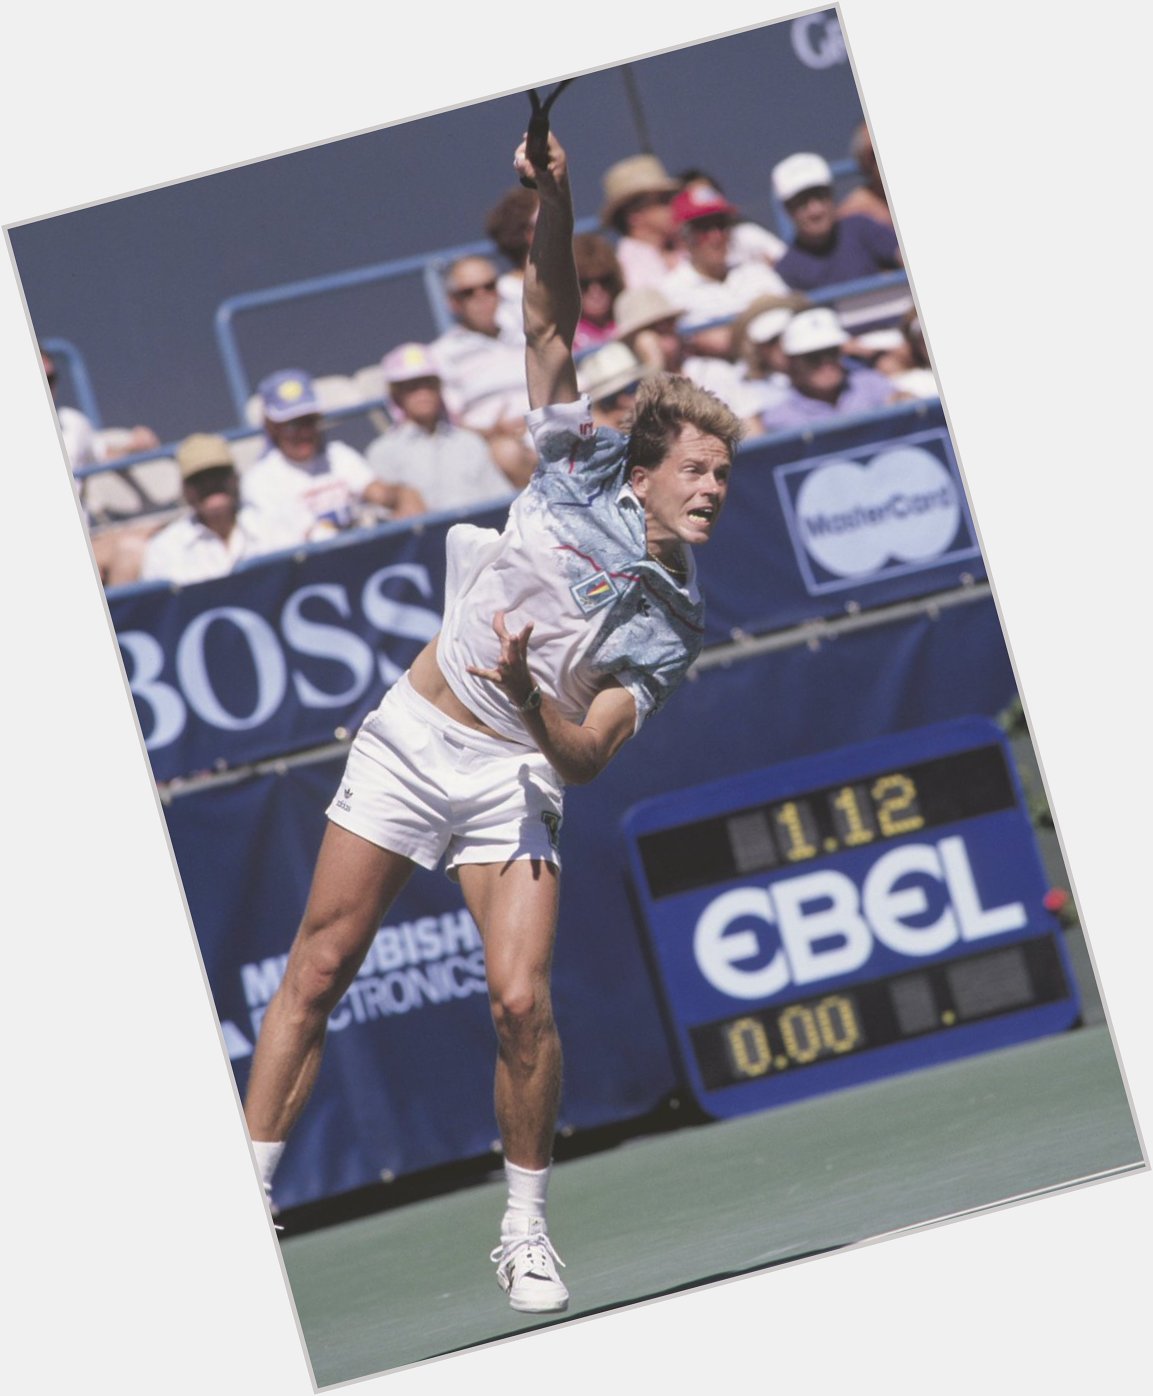 Happy Birthday to 9-time major champion and former world No. 1, the great serve and volleyer Stefan Edberg  